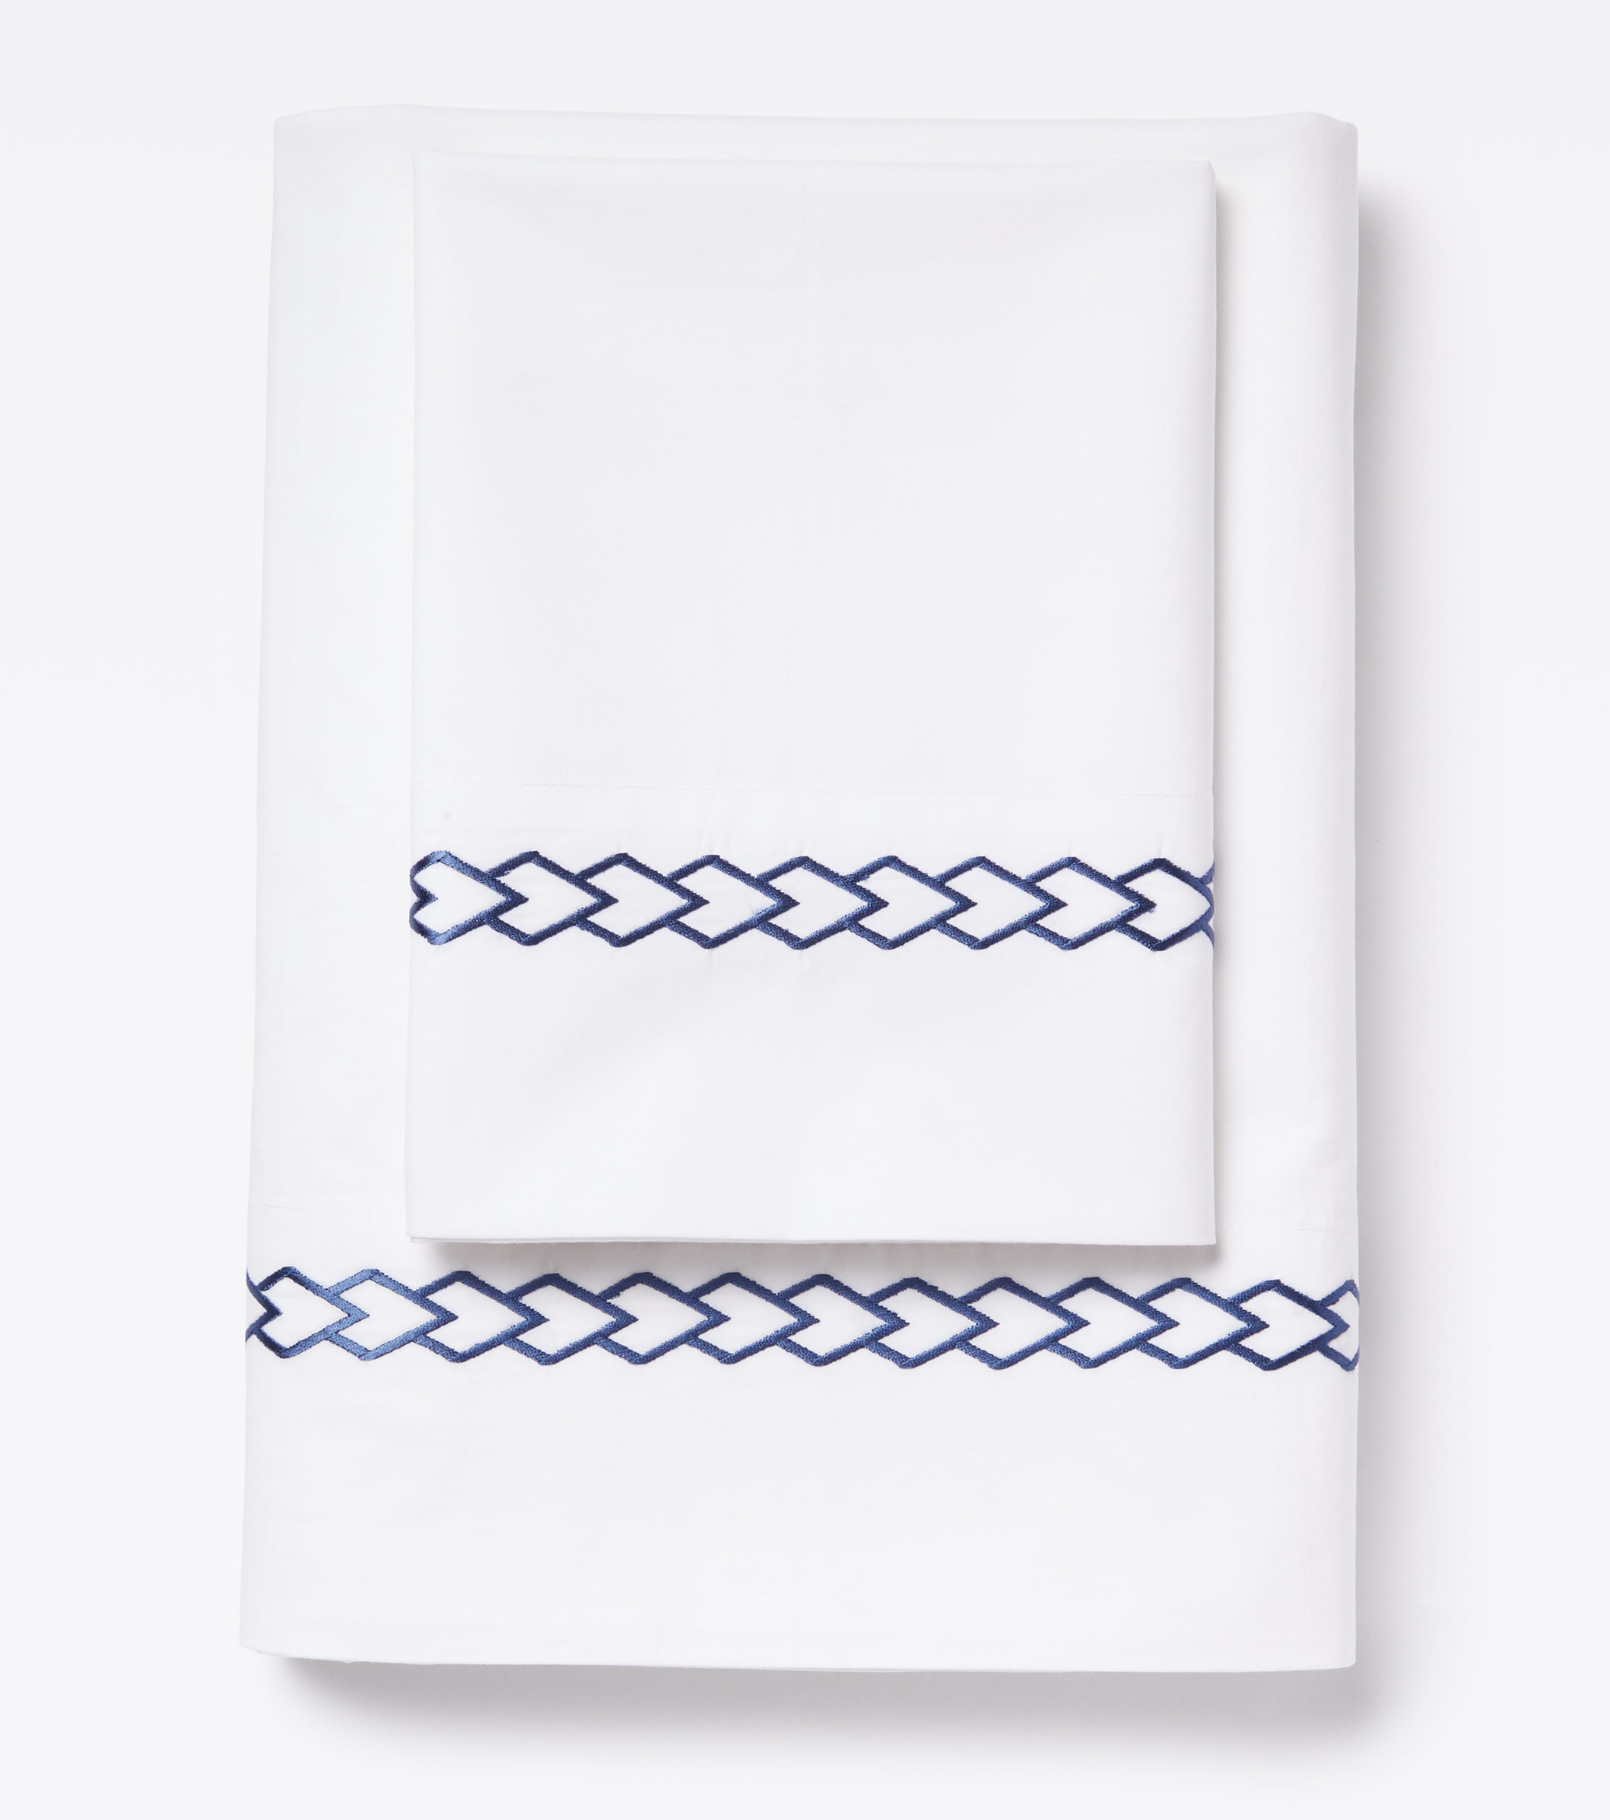 Averylily Waterfall Sheet Set in White with embroidered details in Ocean Blue. 510-thread cotton pure cotton percale.